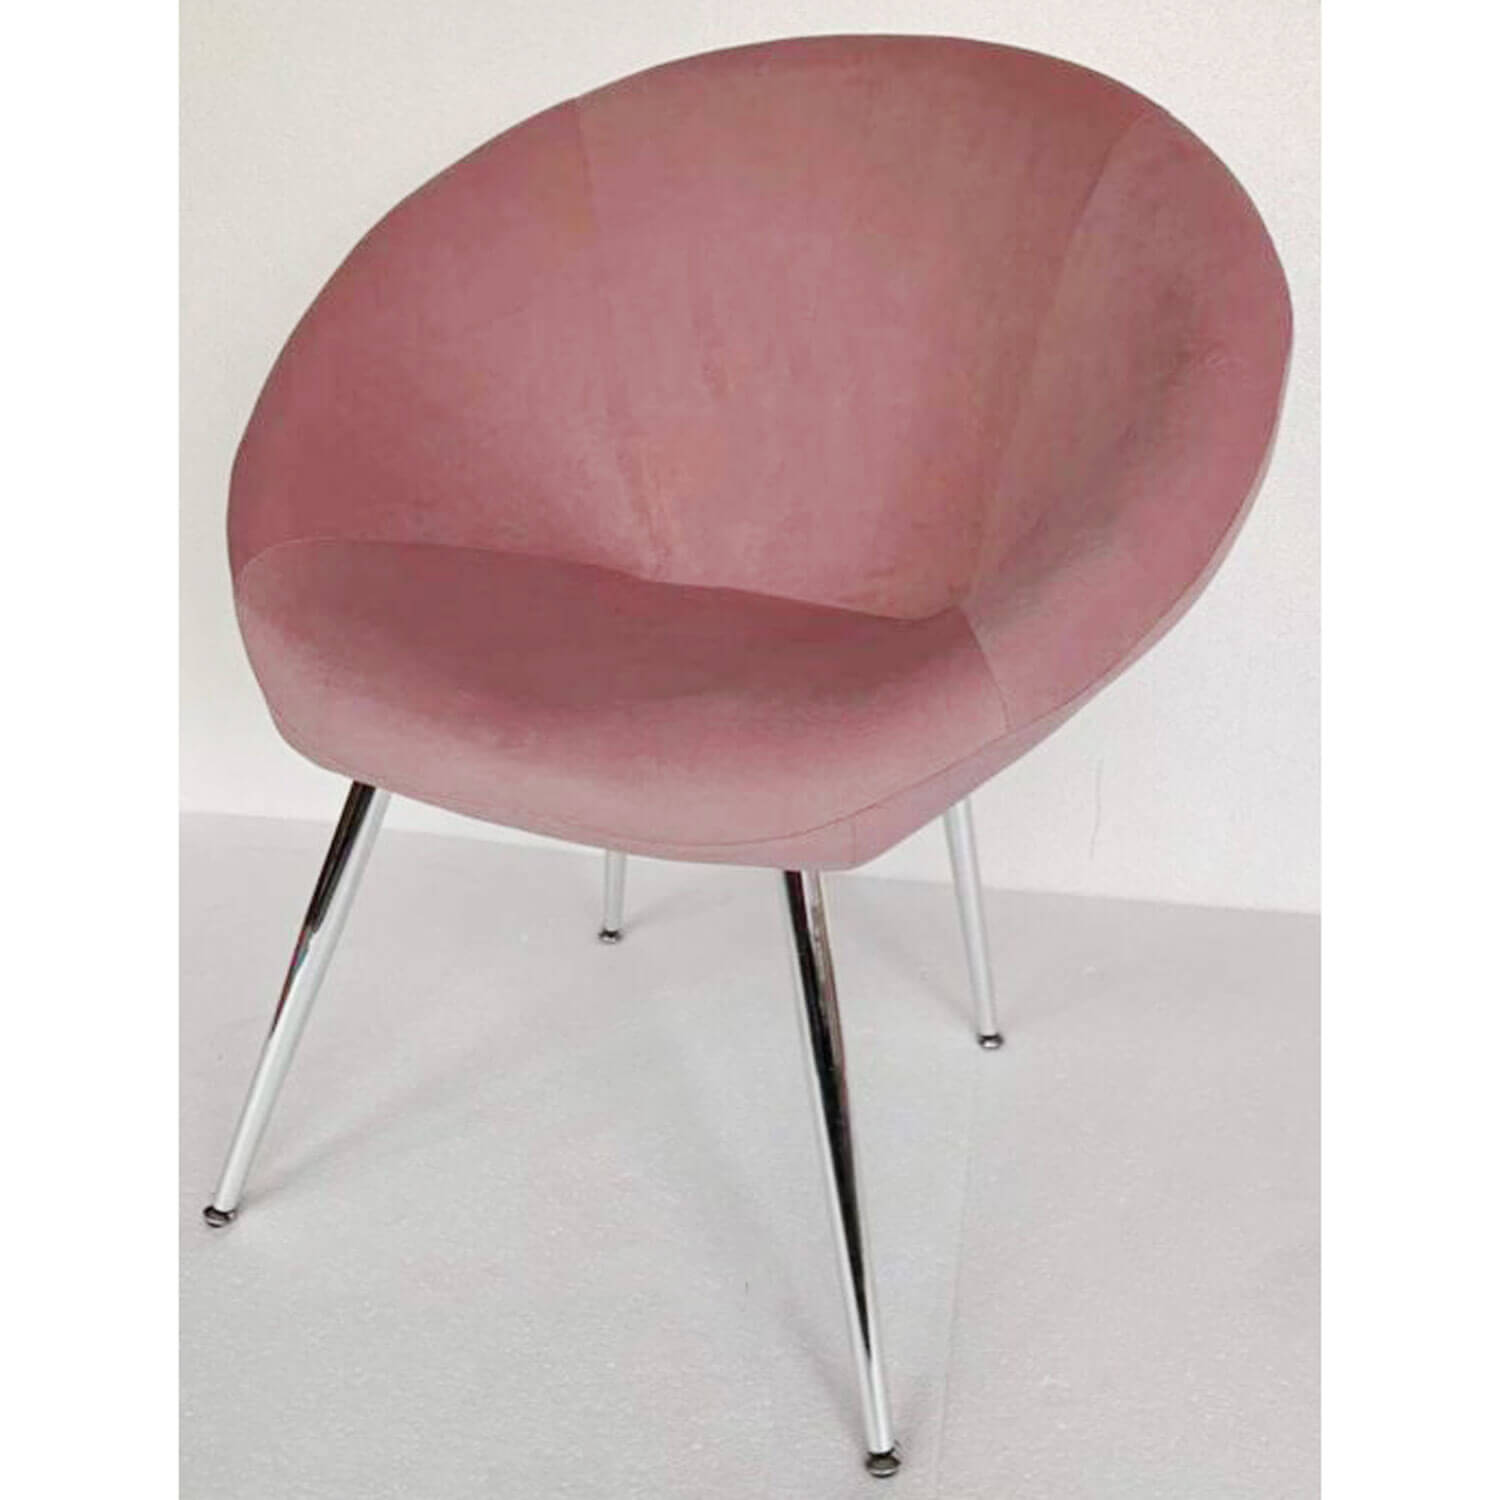 The Home Collection Deco Chair - Pink 1 Shaws Department Stores